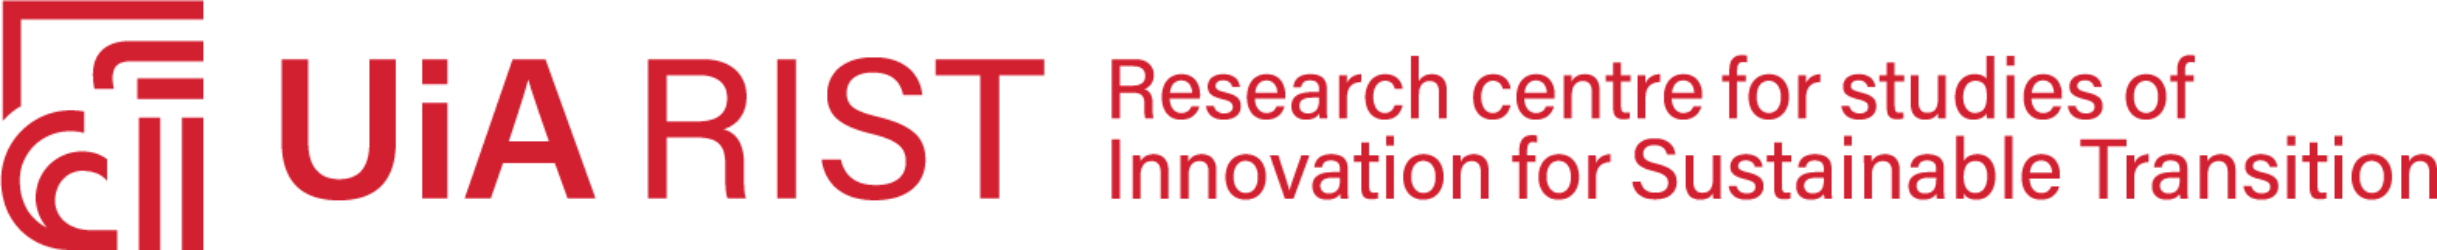 Research centre for studies of Innovation for Sustainable Transition (RIST)